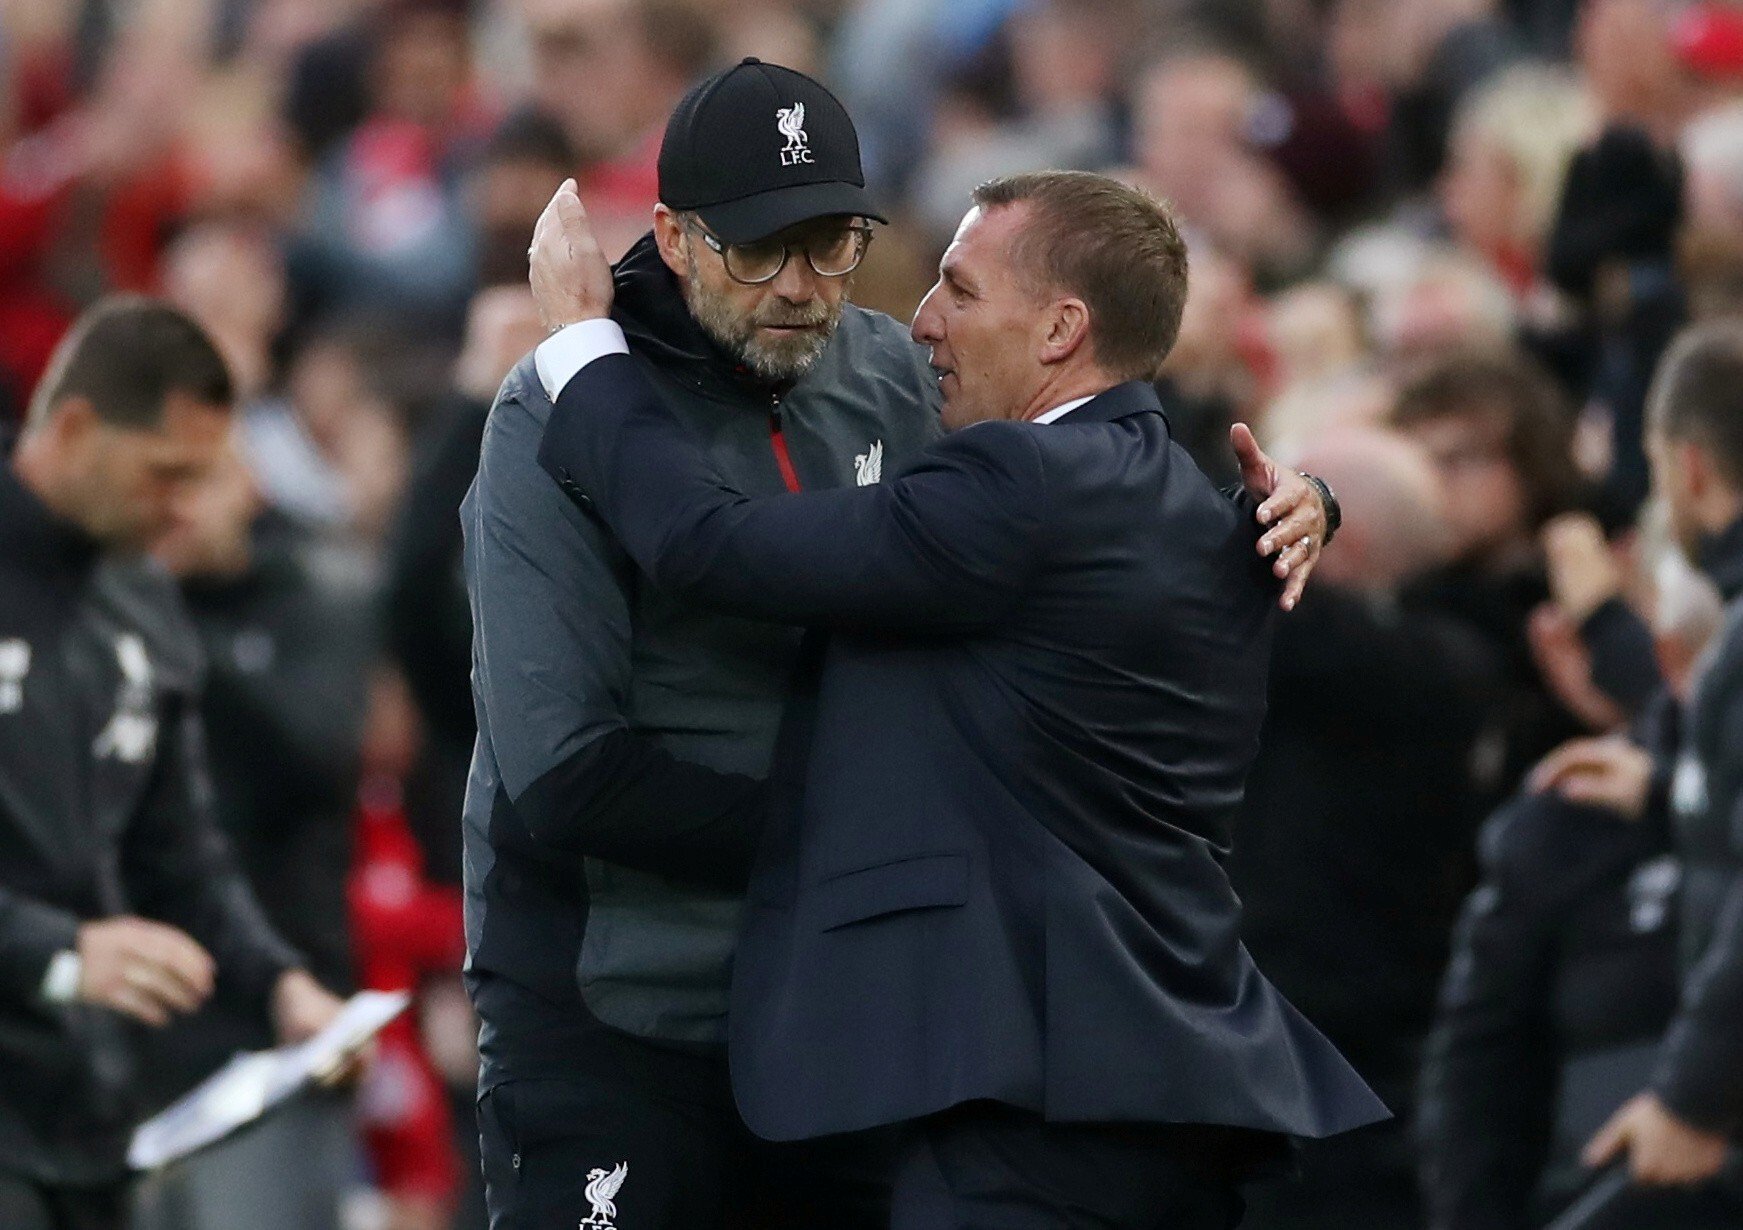 Liverpool manager Jurgen Klopp and Leicester City counterpart Brendan Rodgers embrace after a Premier League match last October. Photo: Reuters